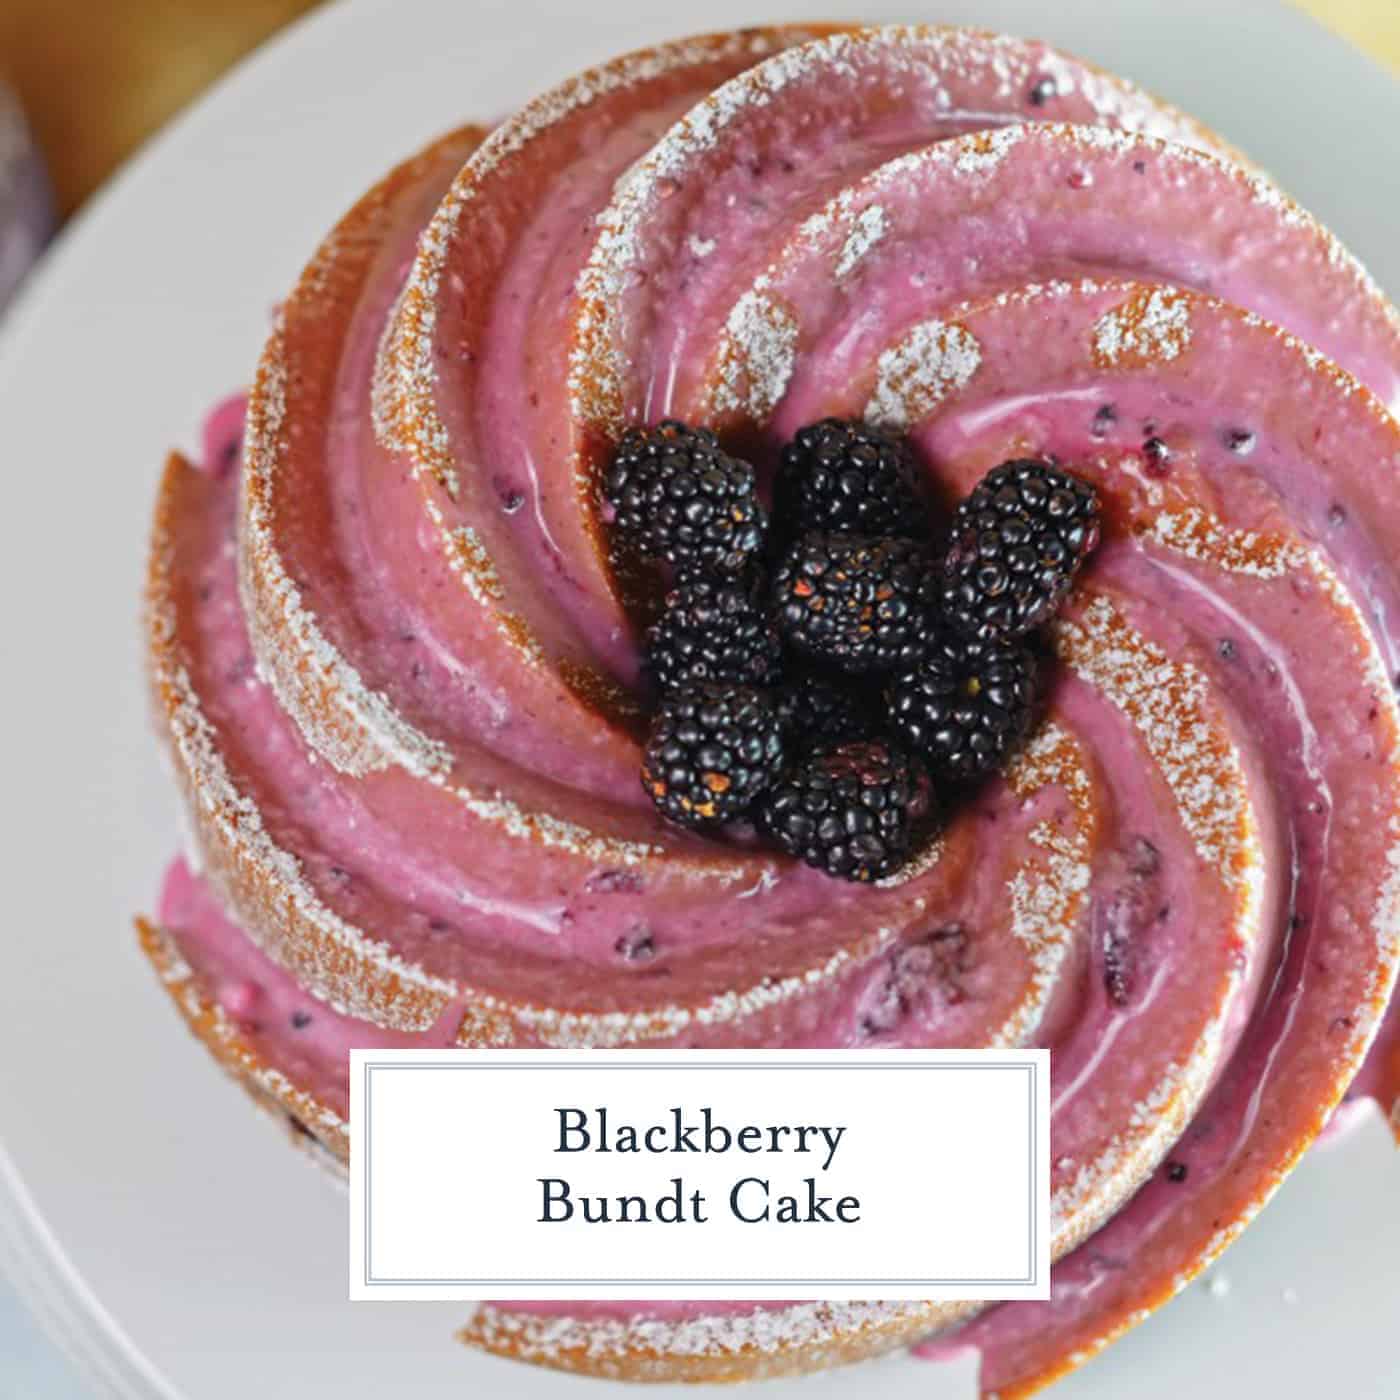 Blackberry Bundt Cake is a pound cake base using ginger ale and fresh blackberries for color, flavor and fluffiness. Top with a powdered sugar blackberry glaze for this heavenly dessert recipe. #bundtcakerecipe #blackberryrecipes www.savoryexperiments.com